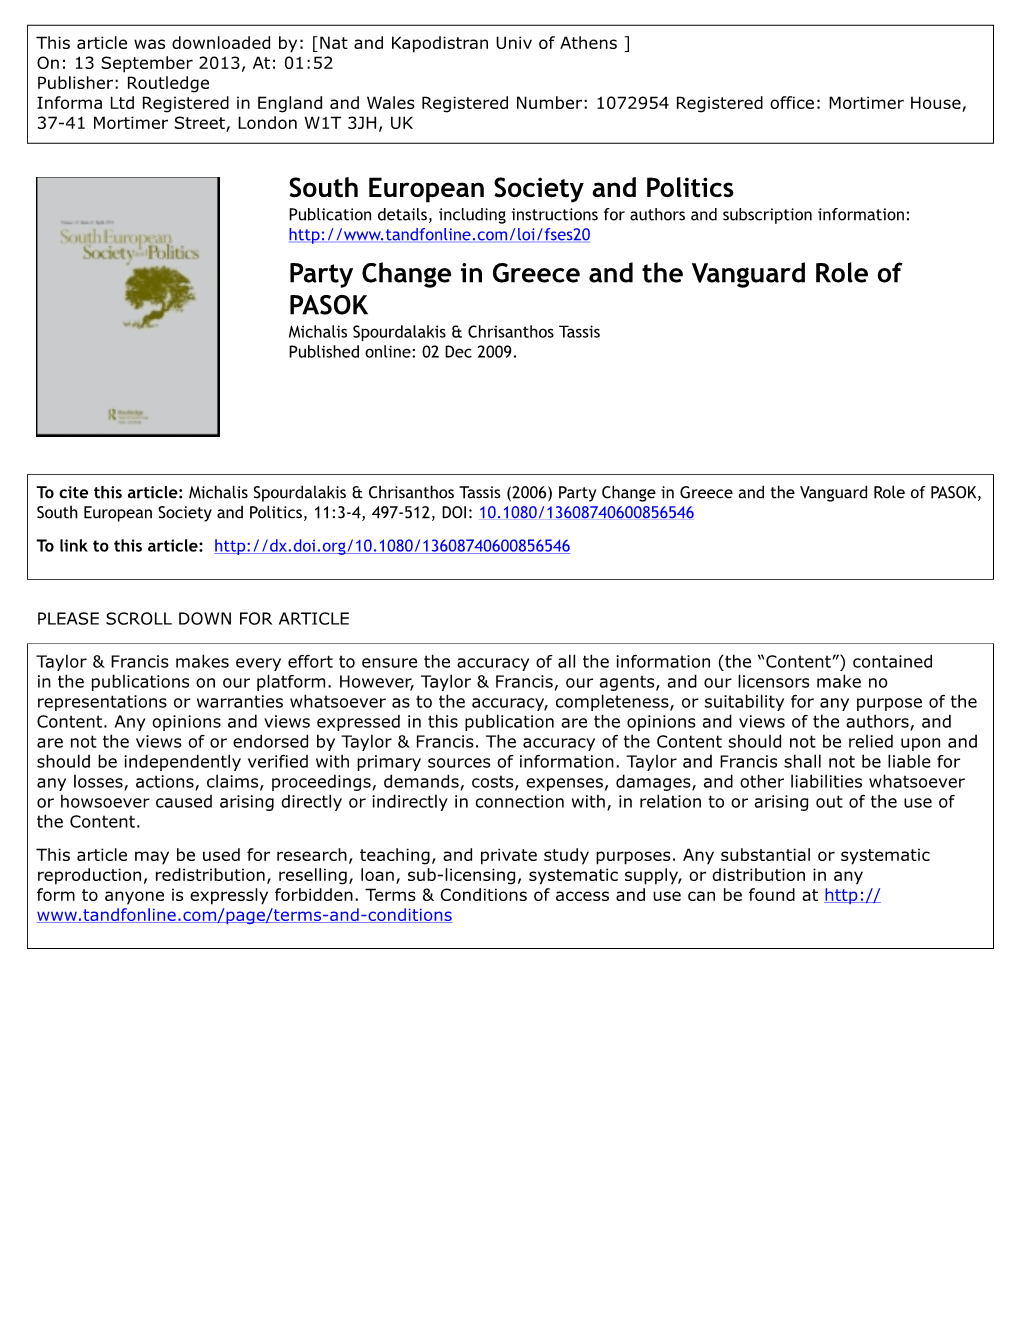 South European Society and Politics Party Change in Greece And